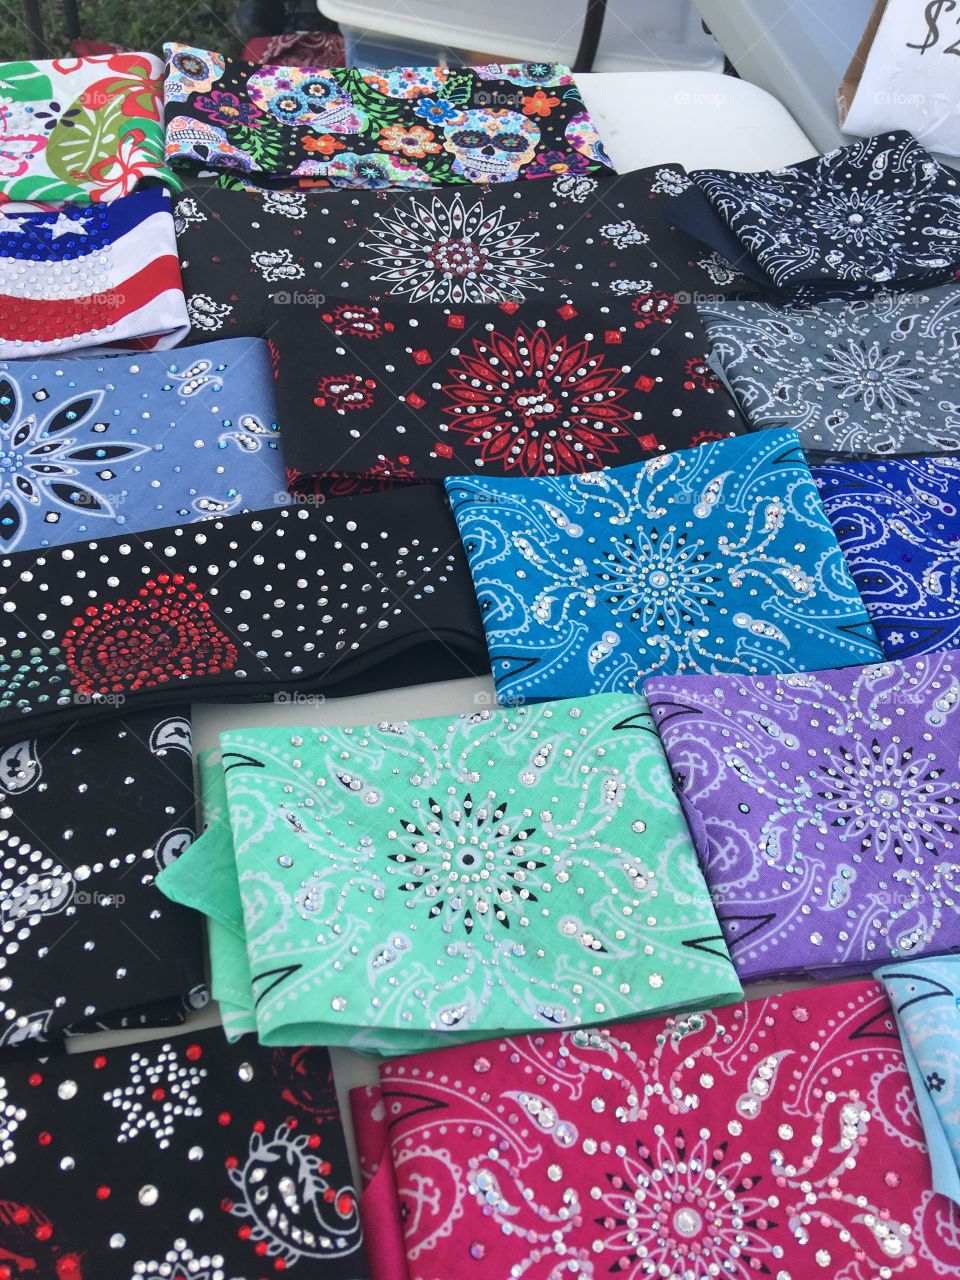 Bling Bling Bandannas! All colors and sizes what’s your style? Here at the bike rally.